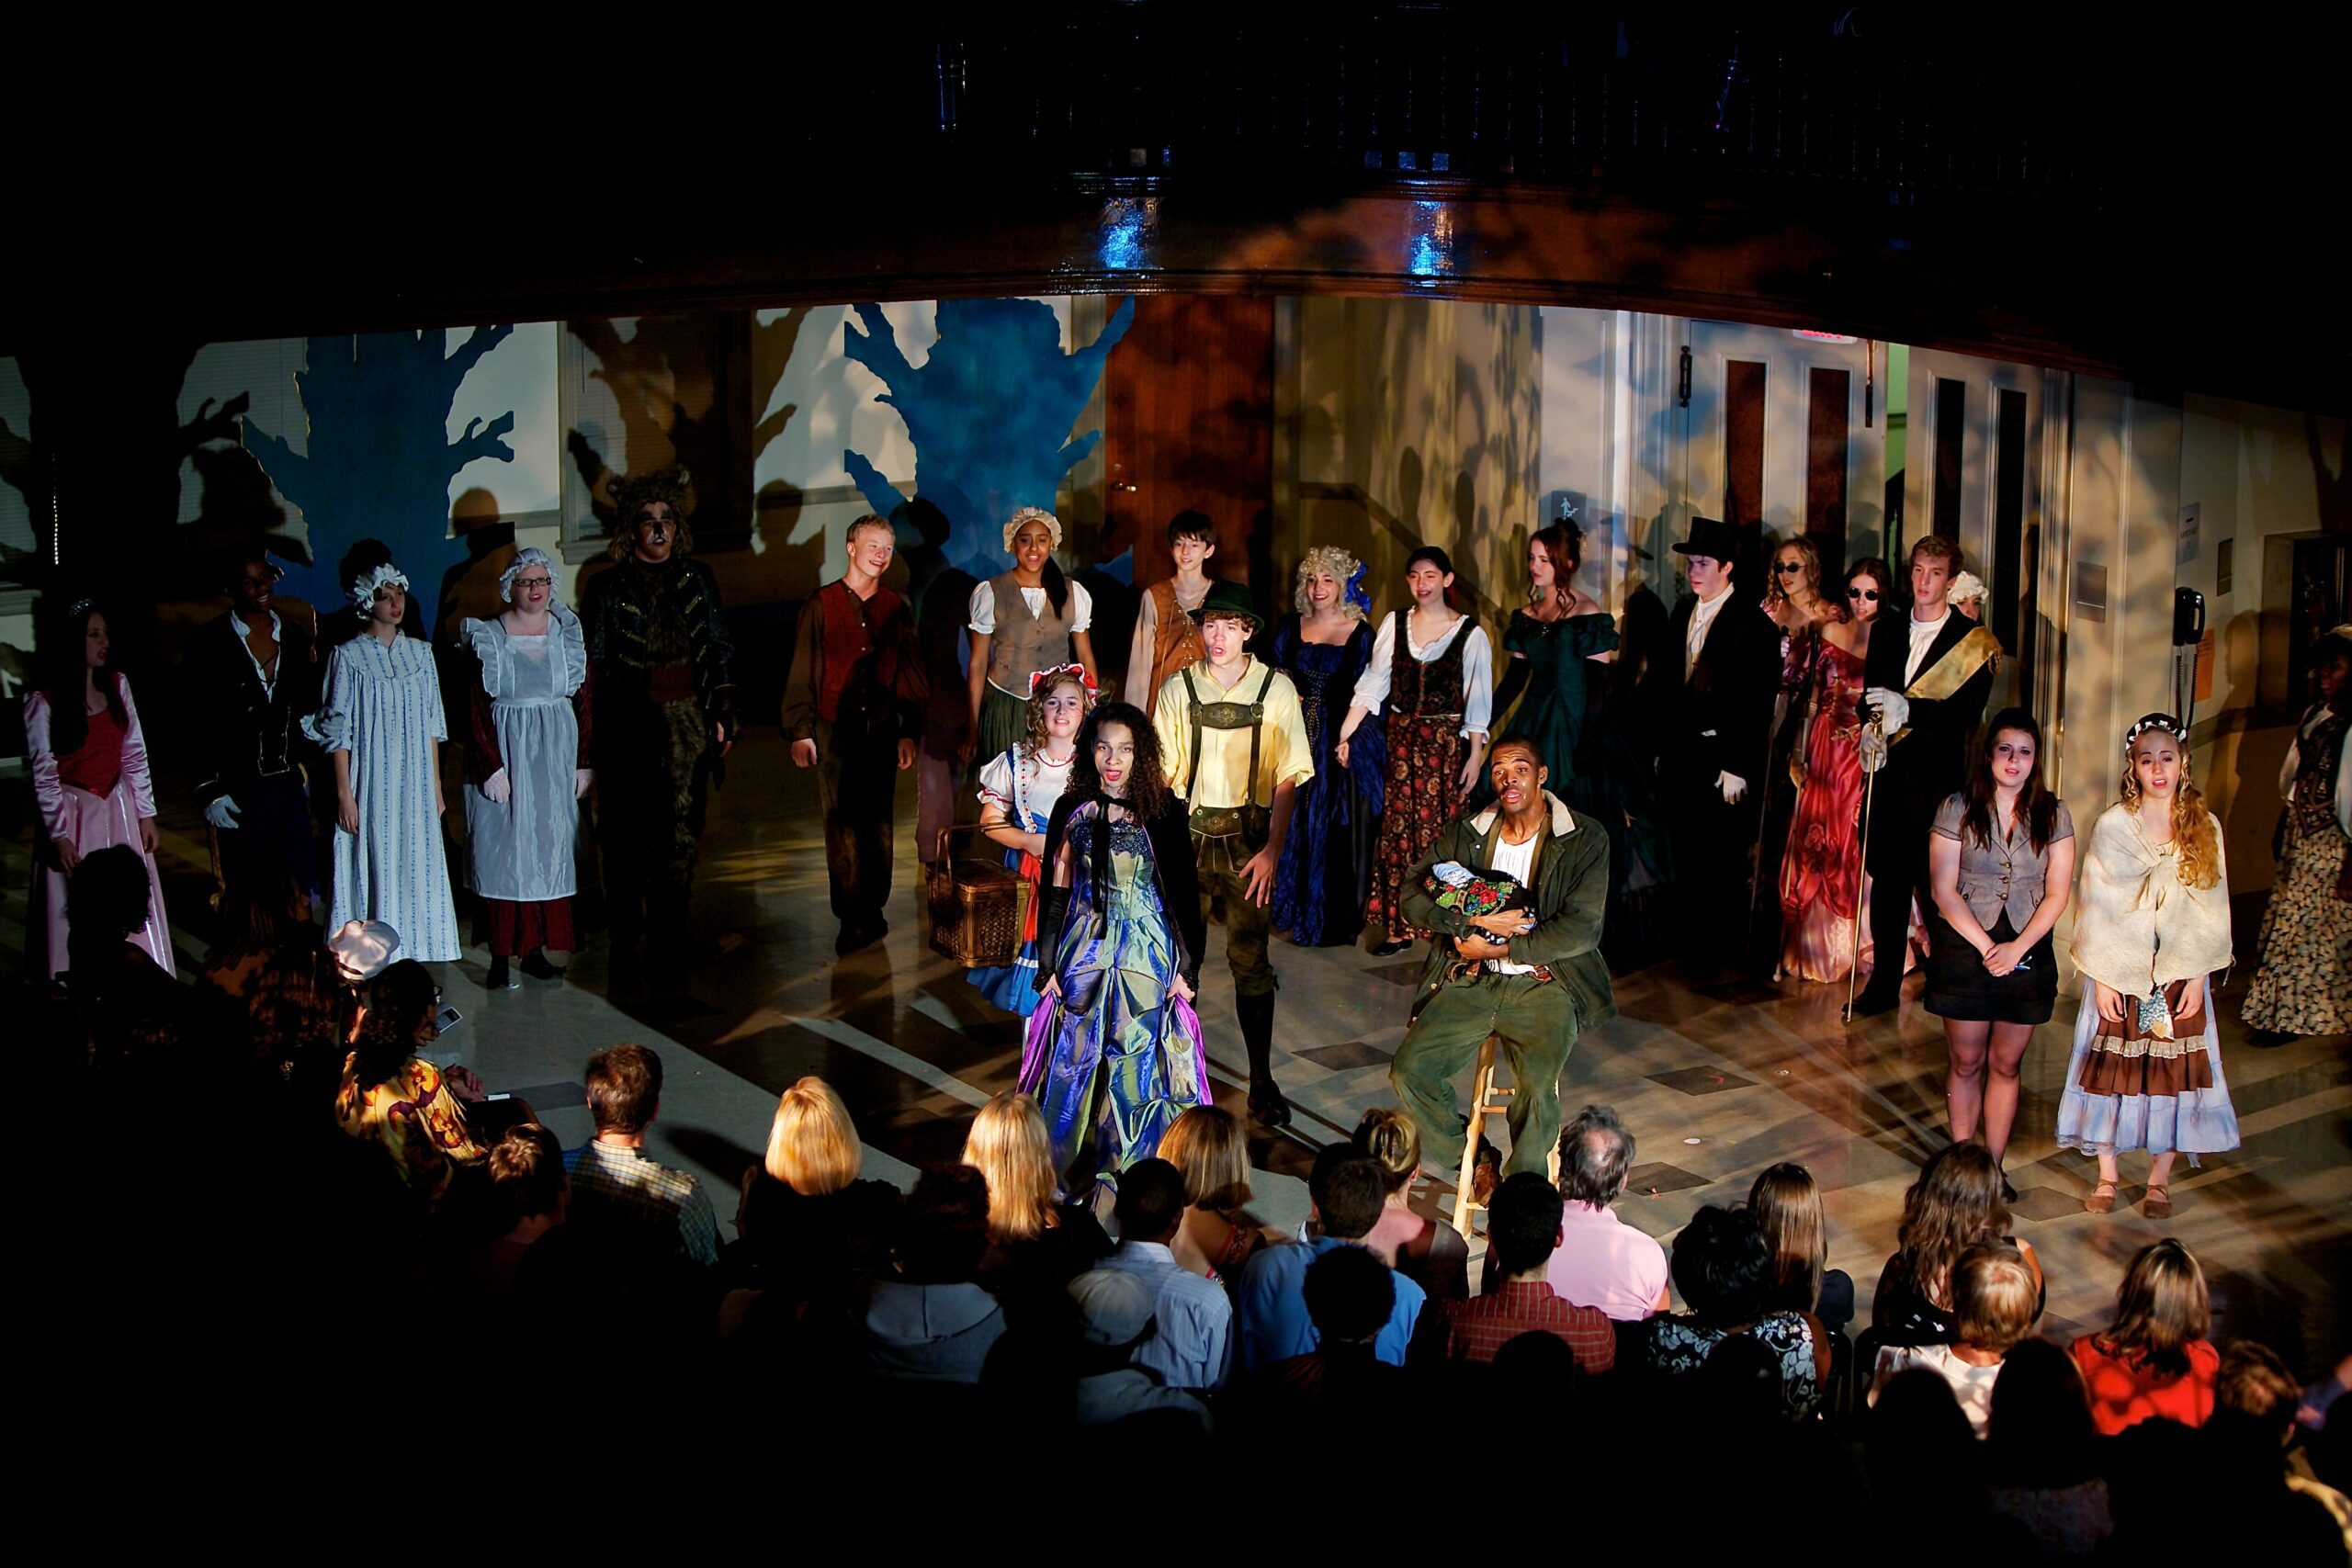 Still image from the musical "Into The Woods" performed by the Musical Theatre Institute for Teens at The Theatre Lab School of the Dramatic Arts.